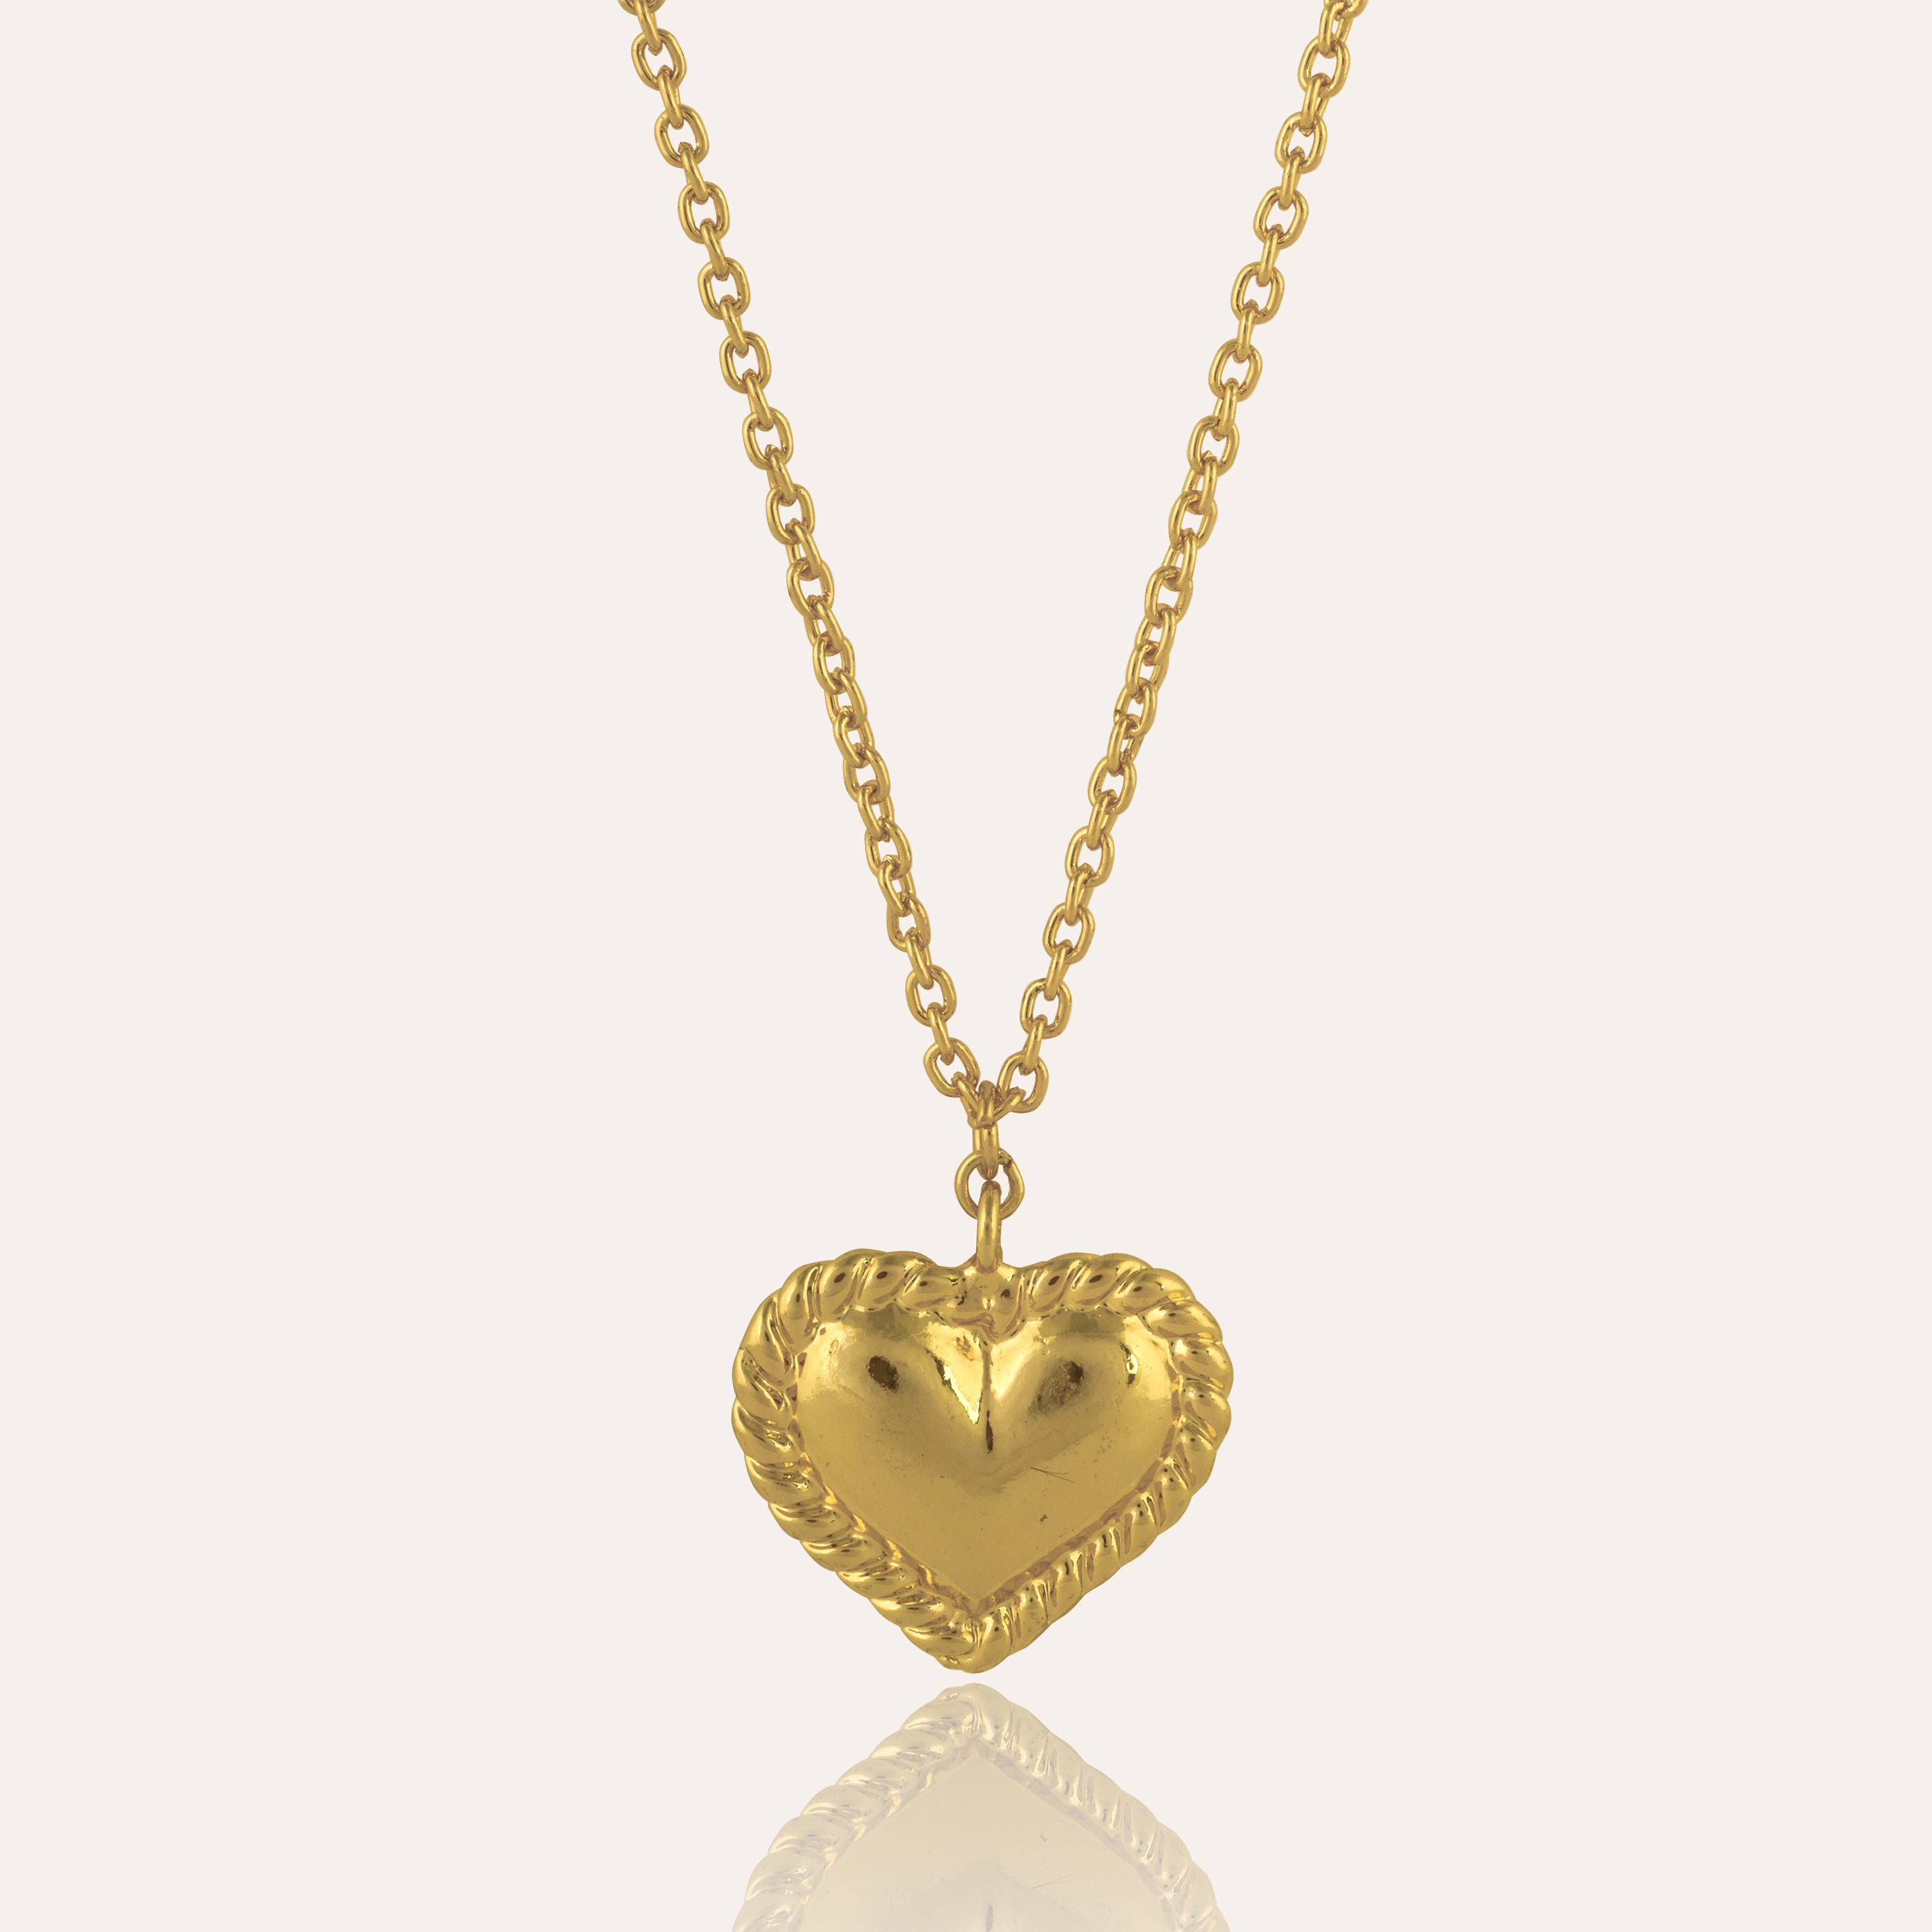 TFC Heartfelt Gold Plated Pendant Necklace-Enhance your elegance with our collection of gold-plated necklaces for women. Choose from stunning pendant necklaces, chic choker necklaces, and trendy layered necklaces. Our sleek and dainty designs are both affordable and anti-tarnish, ensuring lasting beauty. Enjoy the cheapest fashion jewellery, lightweight and stylish- only at The Fun Company.